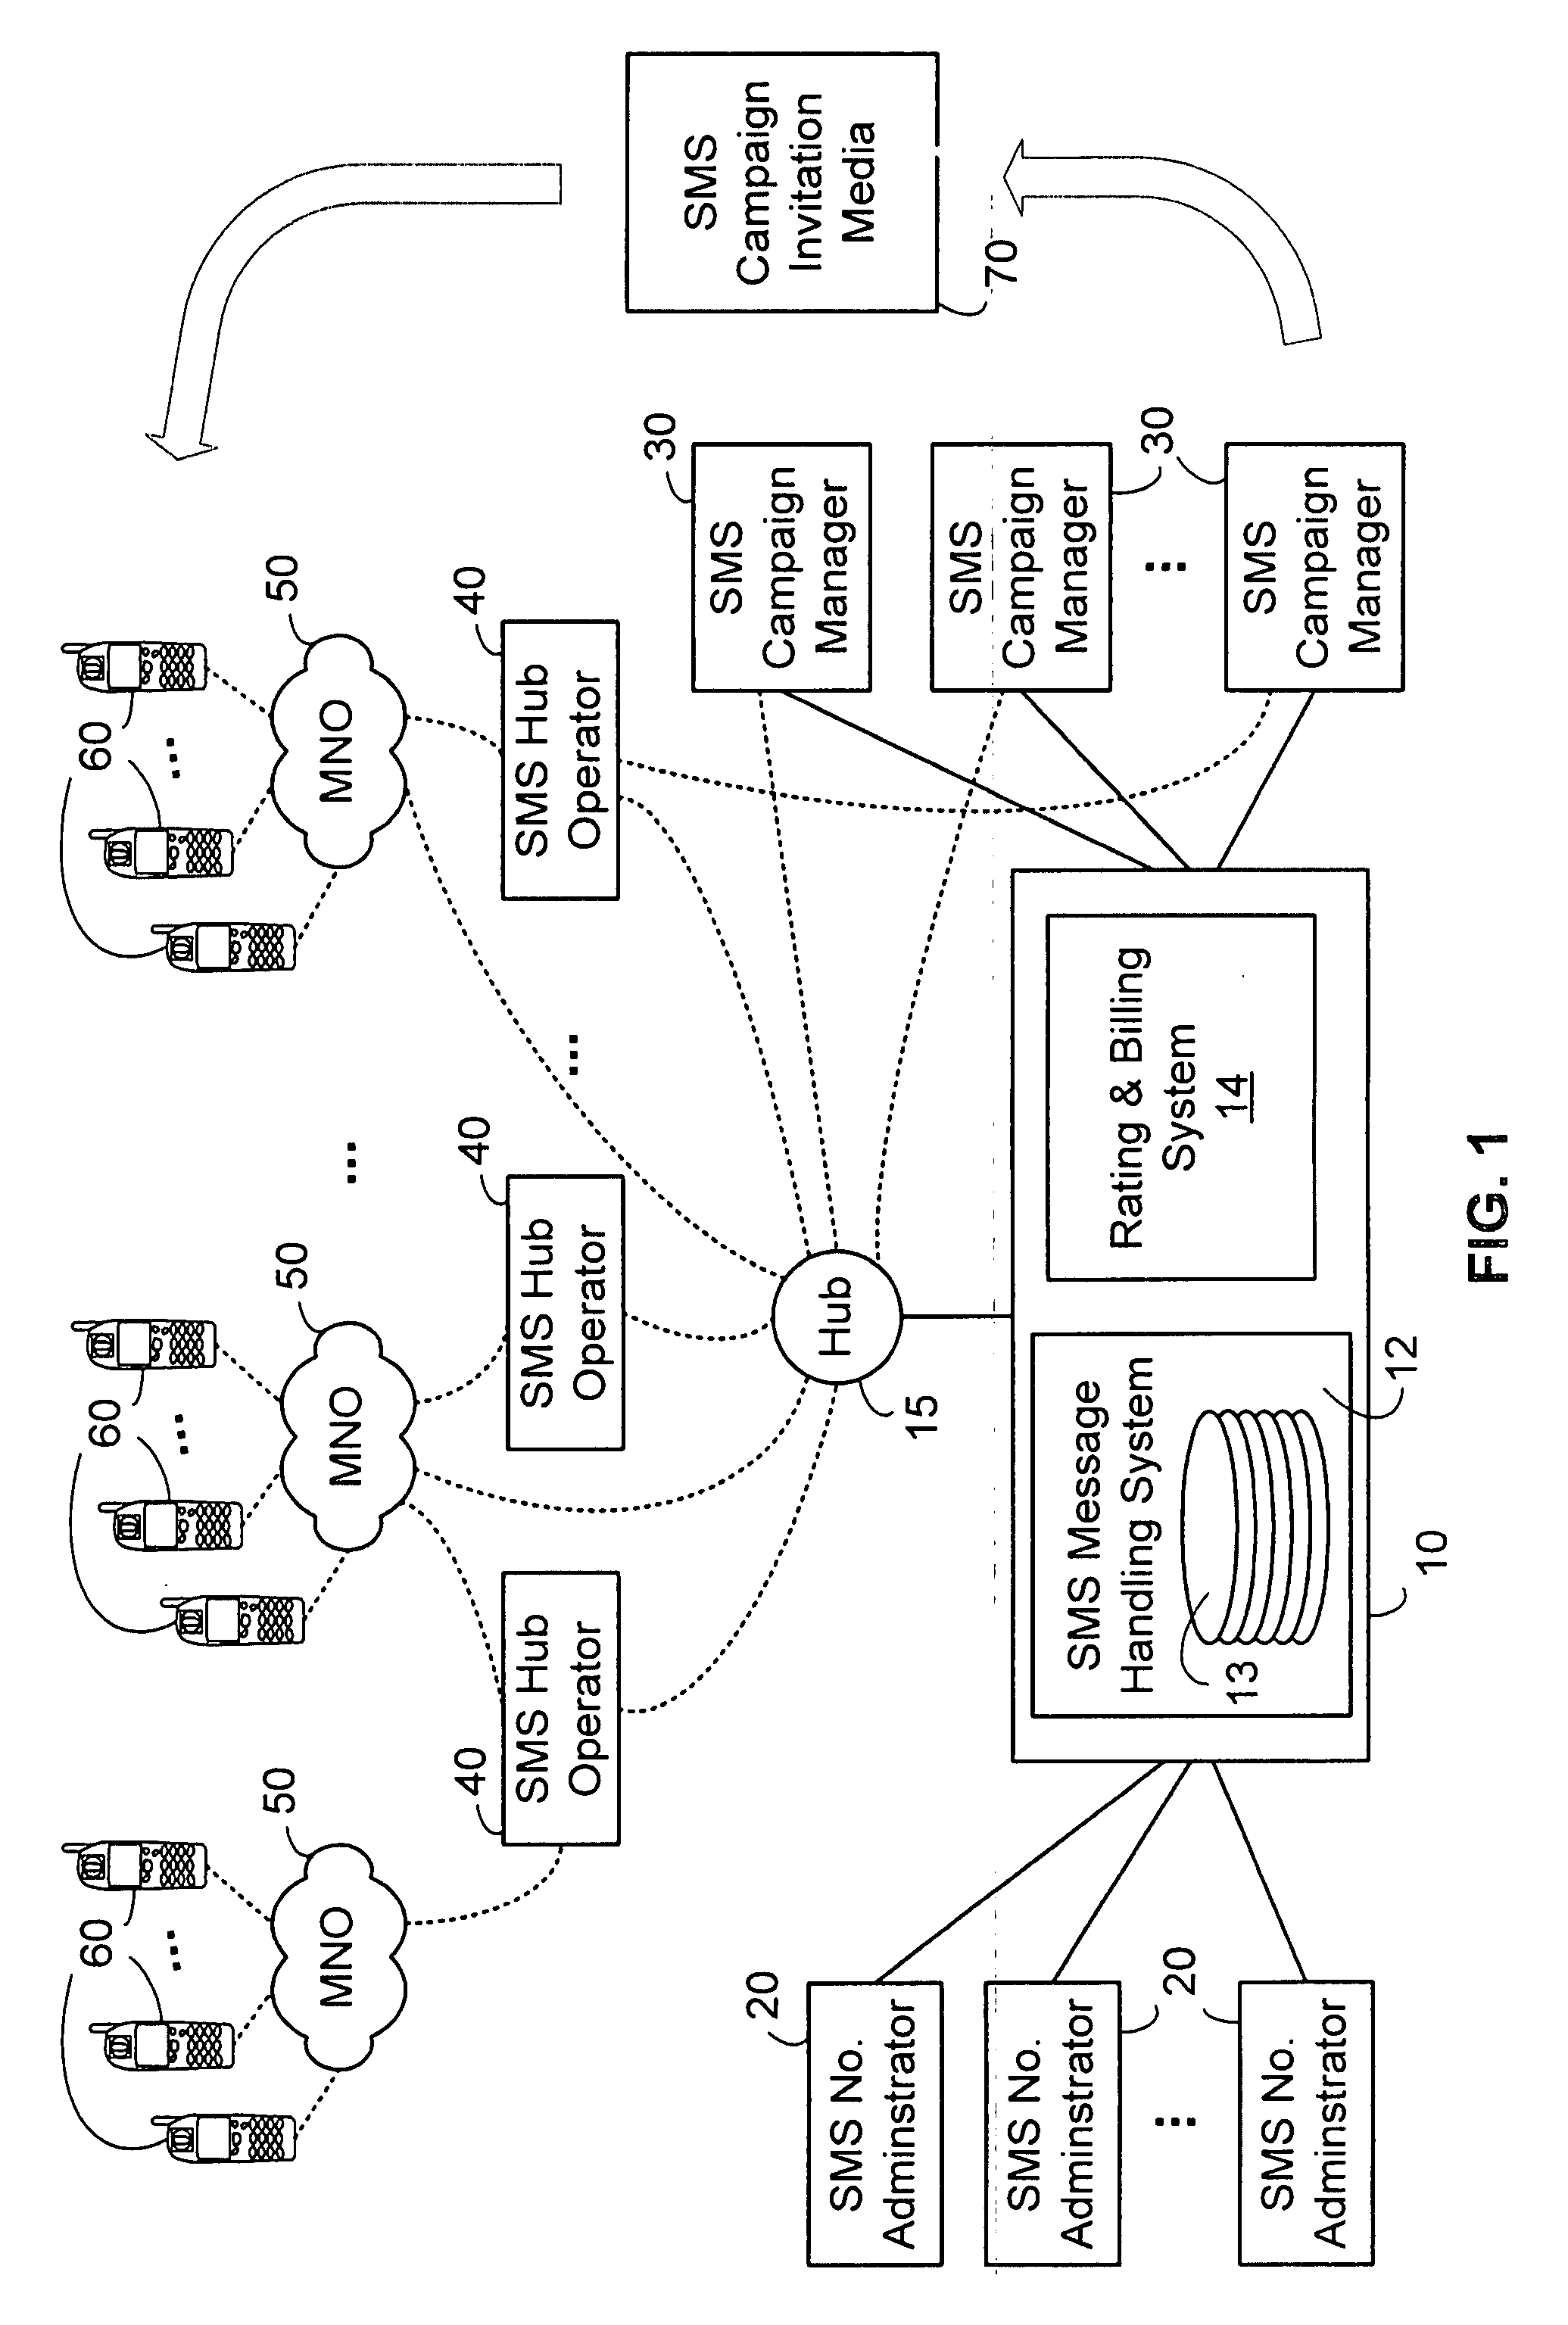 System and method for running an international telephony messaging campaign